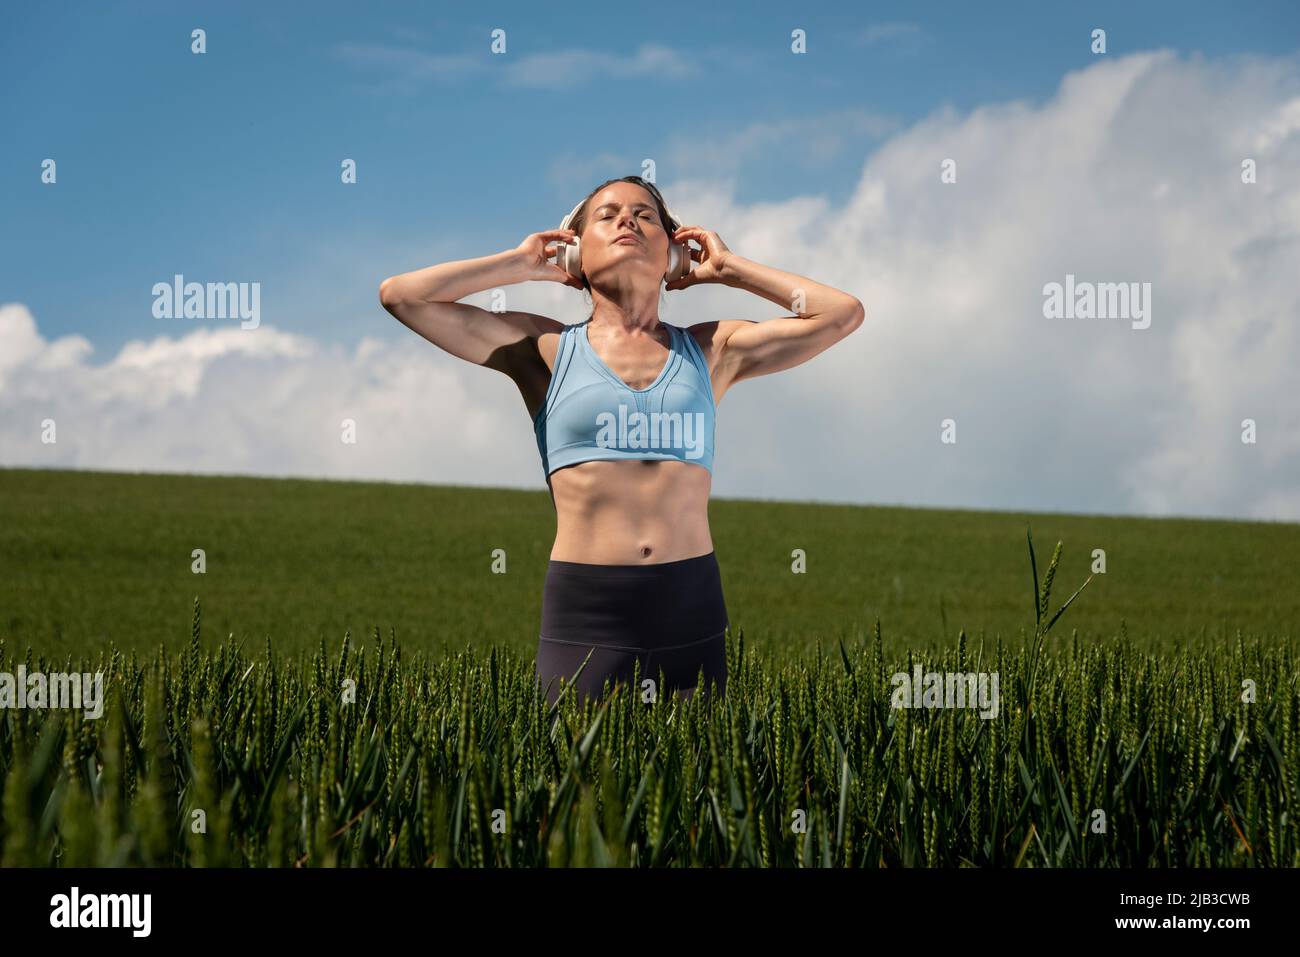 Sporty, fit woman standing in a green field wearing a pair of headphones listening to music, getting away from it all. Stock Photo